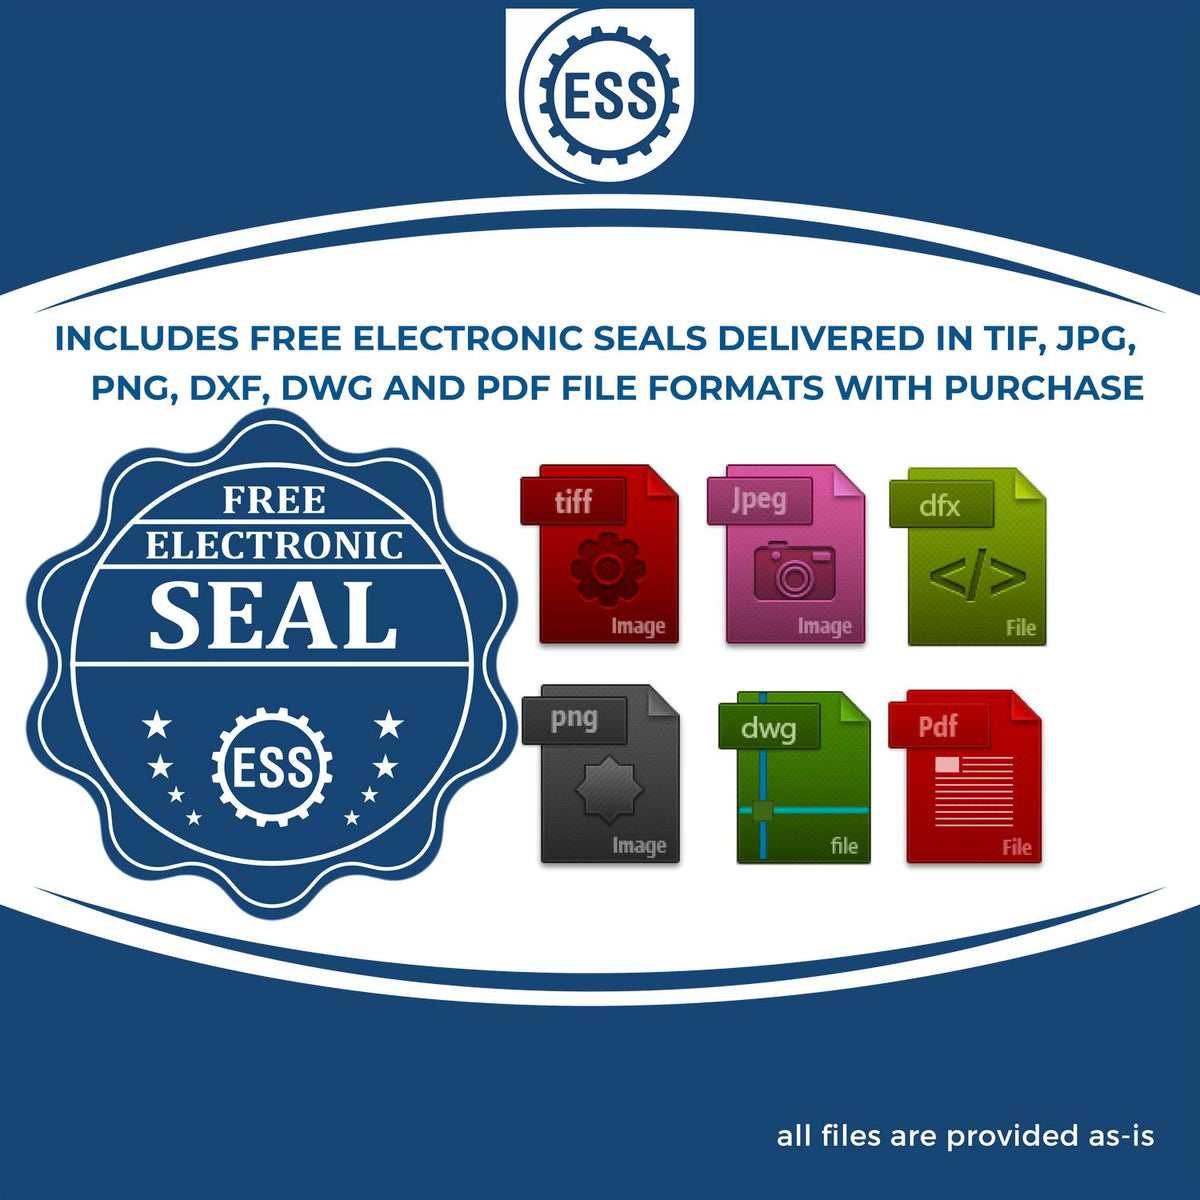 An infographic for the free electronic seal for the Slim Pre-Inked North Carolina Professional Engineer Seal Stamp illustrating the different file type icons such as DXF, DWG, TIF, JPG and PNG.